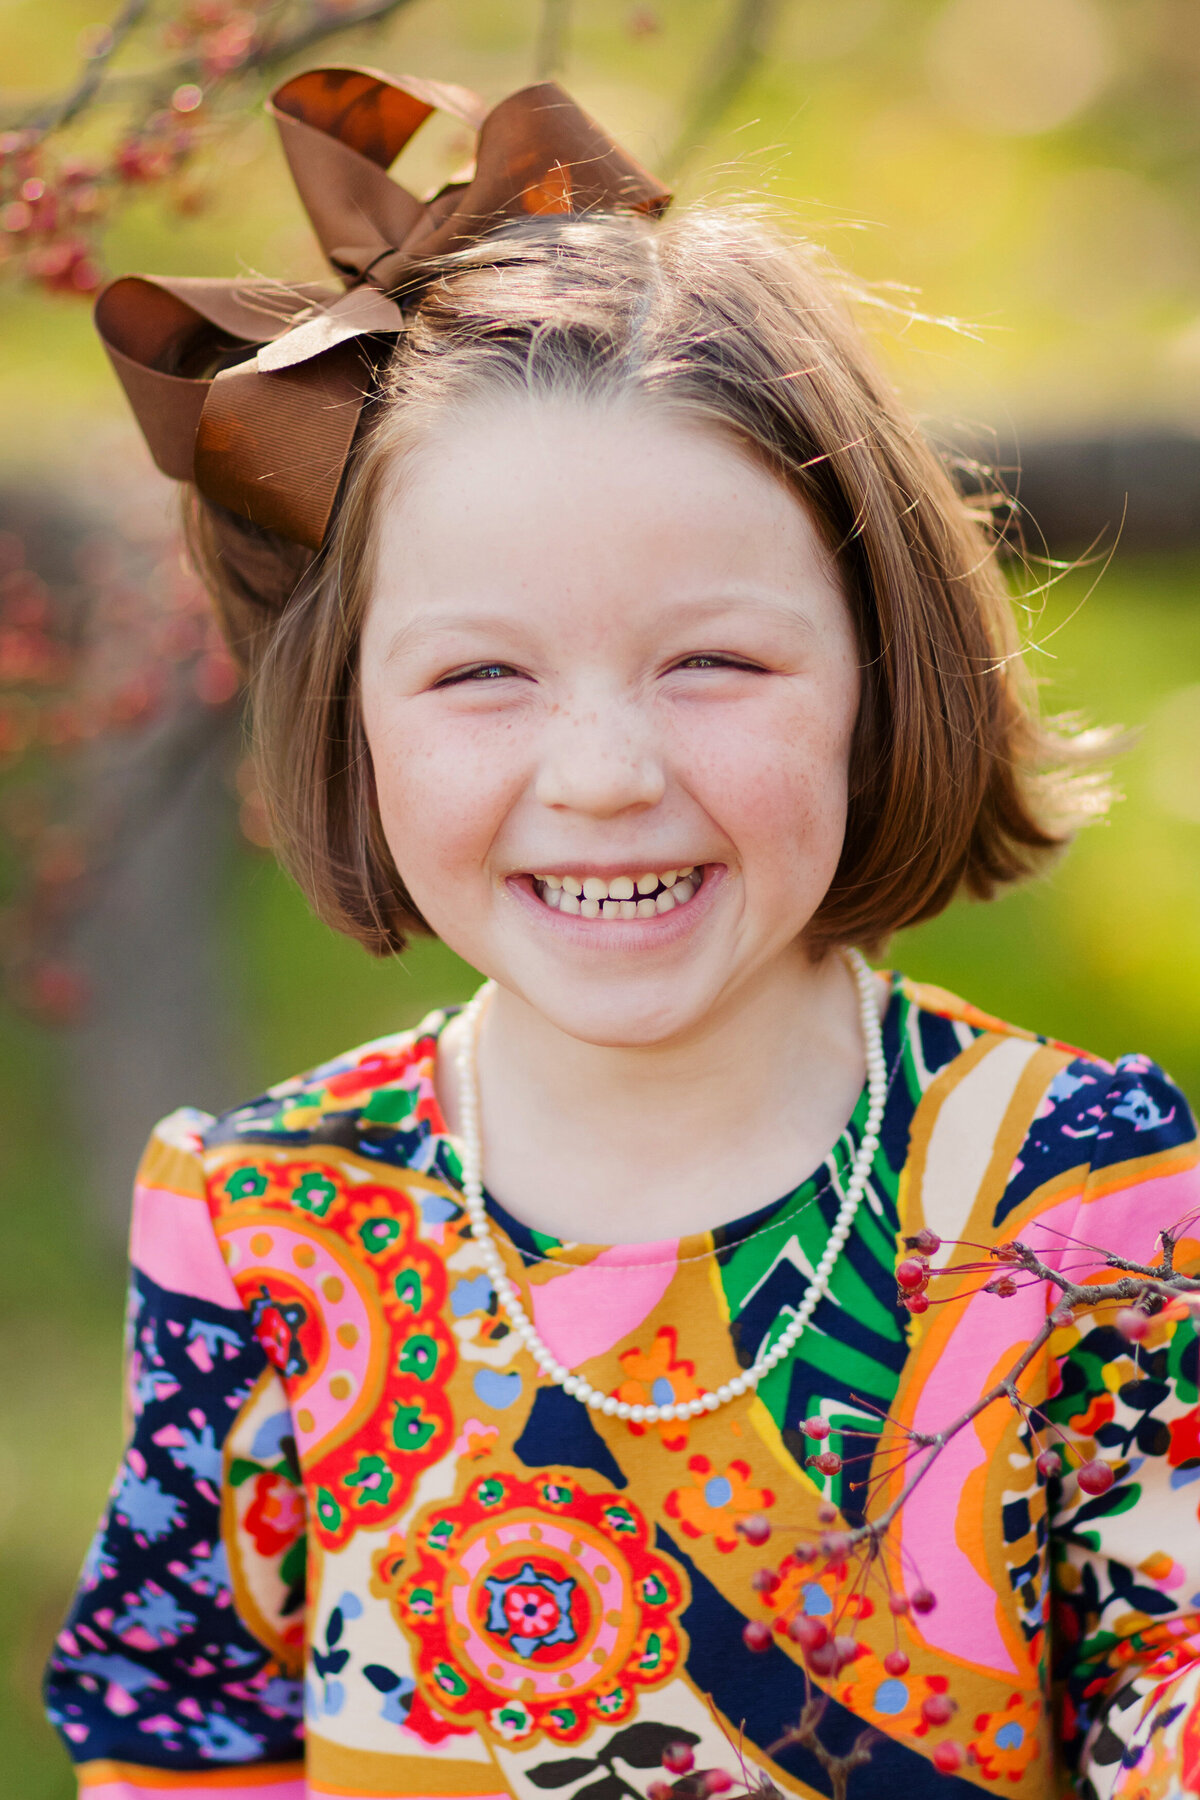 Girl with a brightly colored top, pearl necklace, and big brown bow in her hair smiles big at the camera with happy eyes.